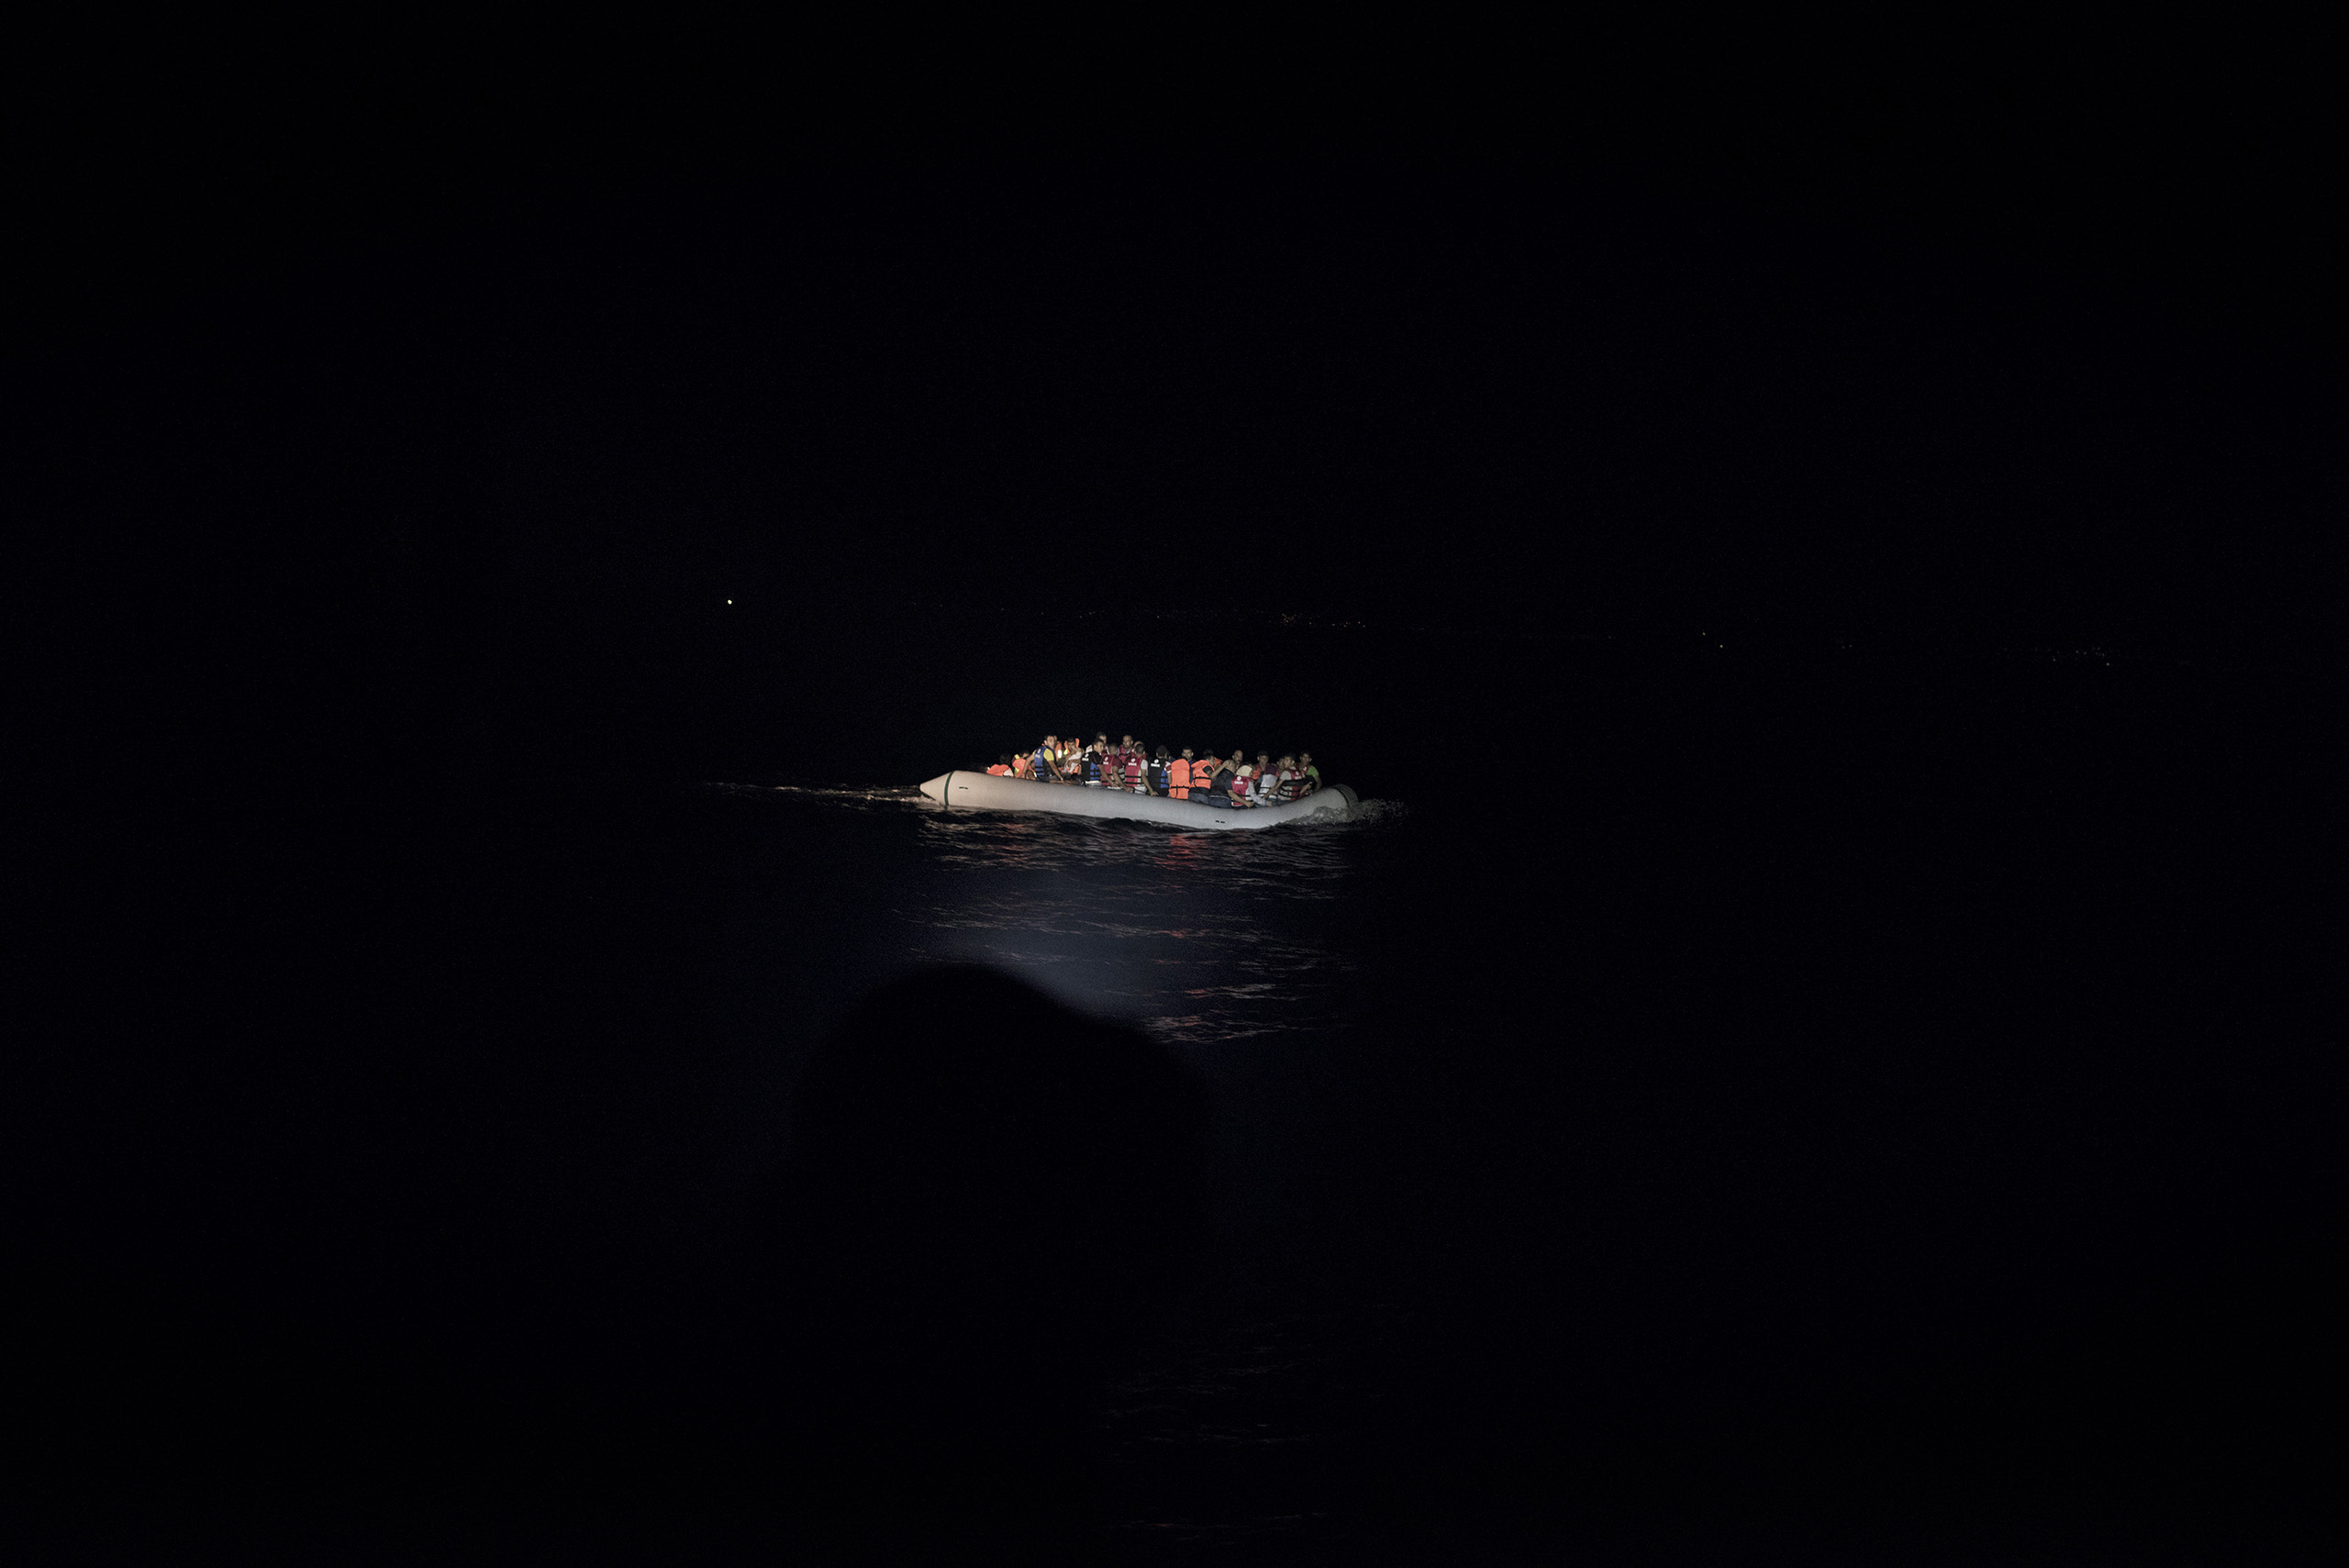 A boat full of migrants is illuminated by the flash lights of Greek coast guards who have come to rescue them from the waters near the Greek-Turkish border. Sept. 7, 2015.